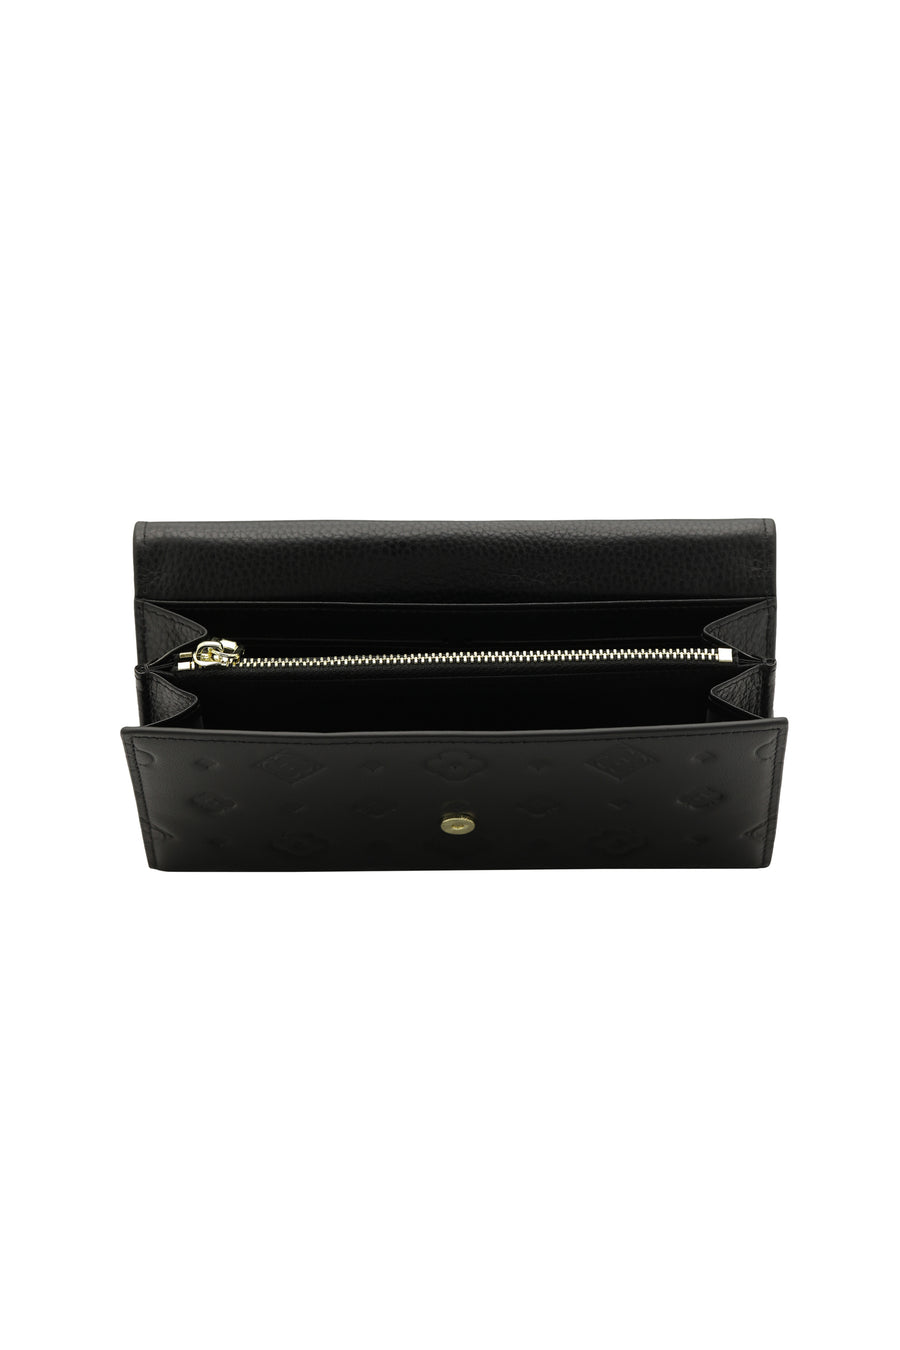 Giovanna's Leather Wallet - Pitch Black